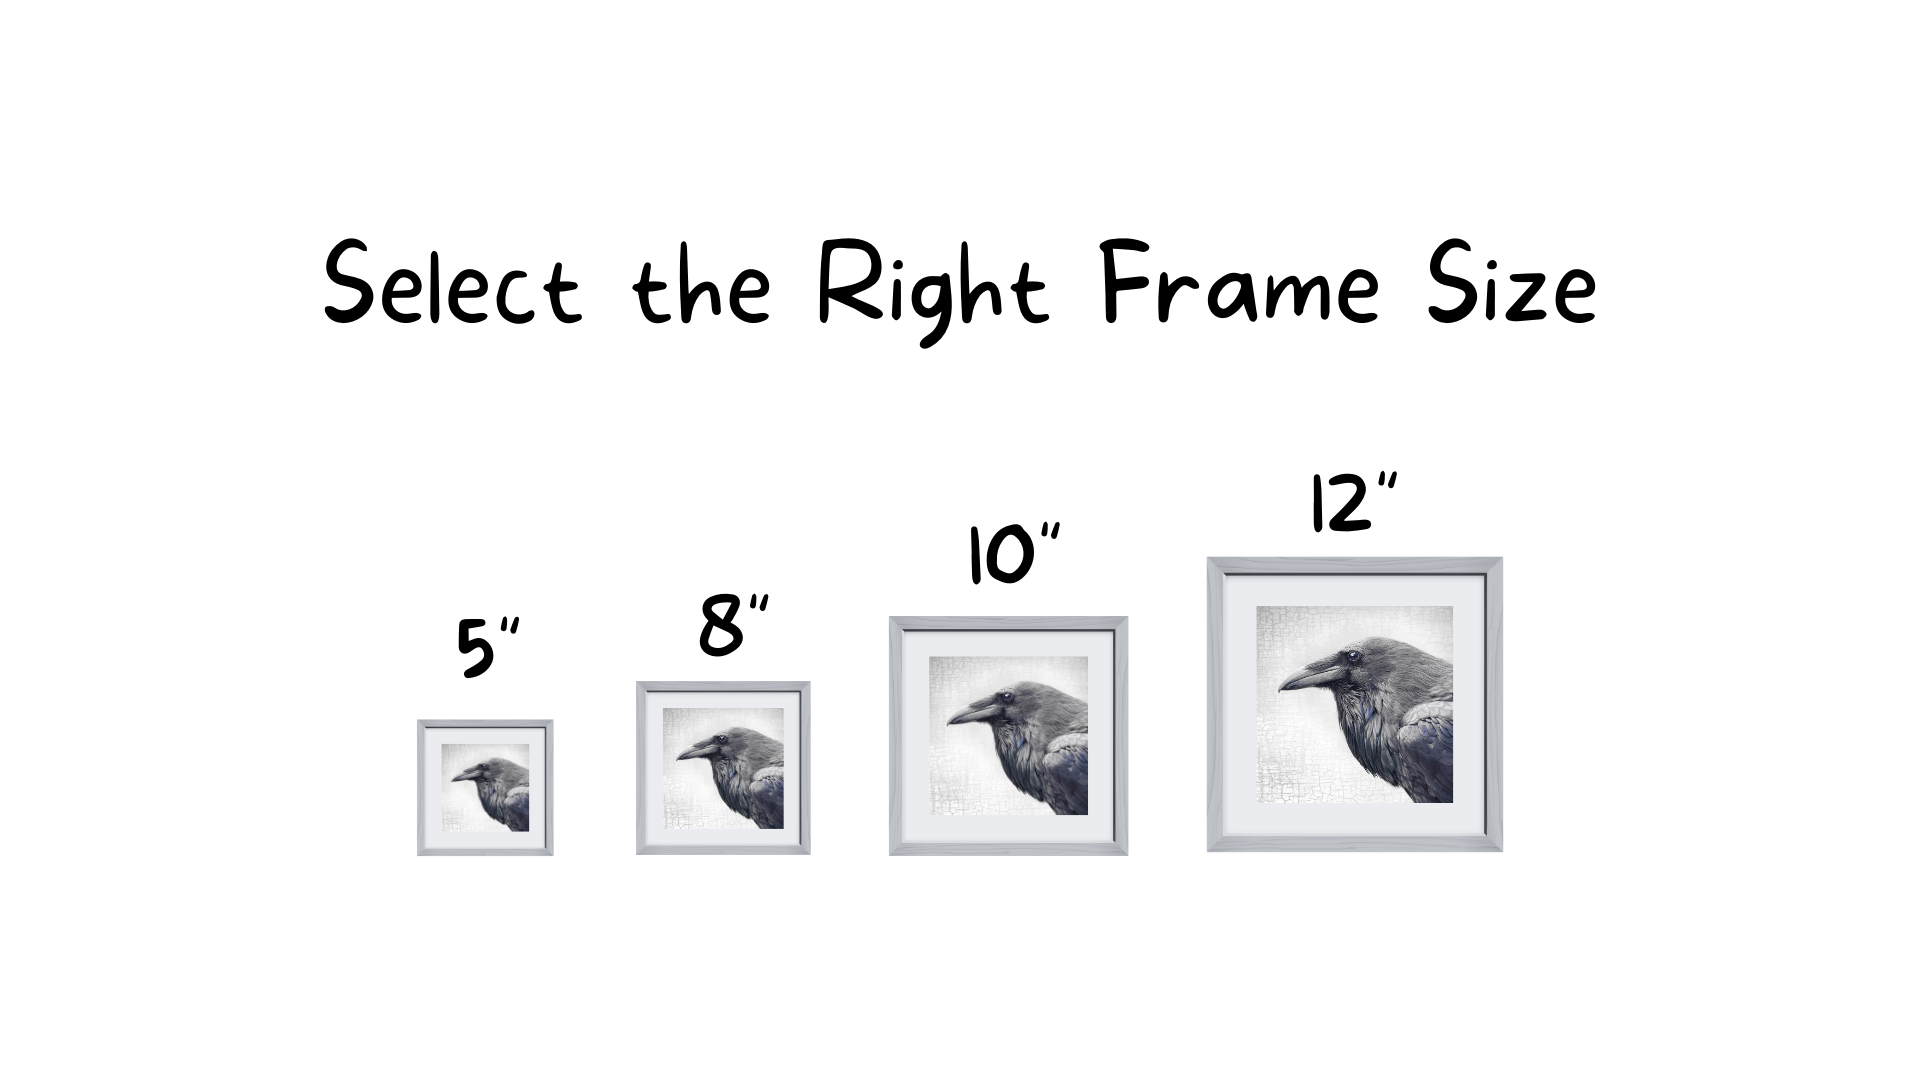 Select the Right Frame Size